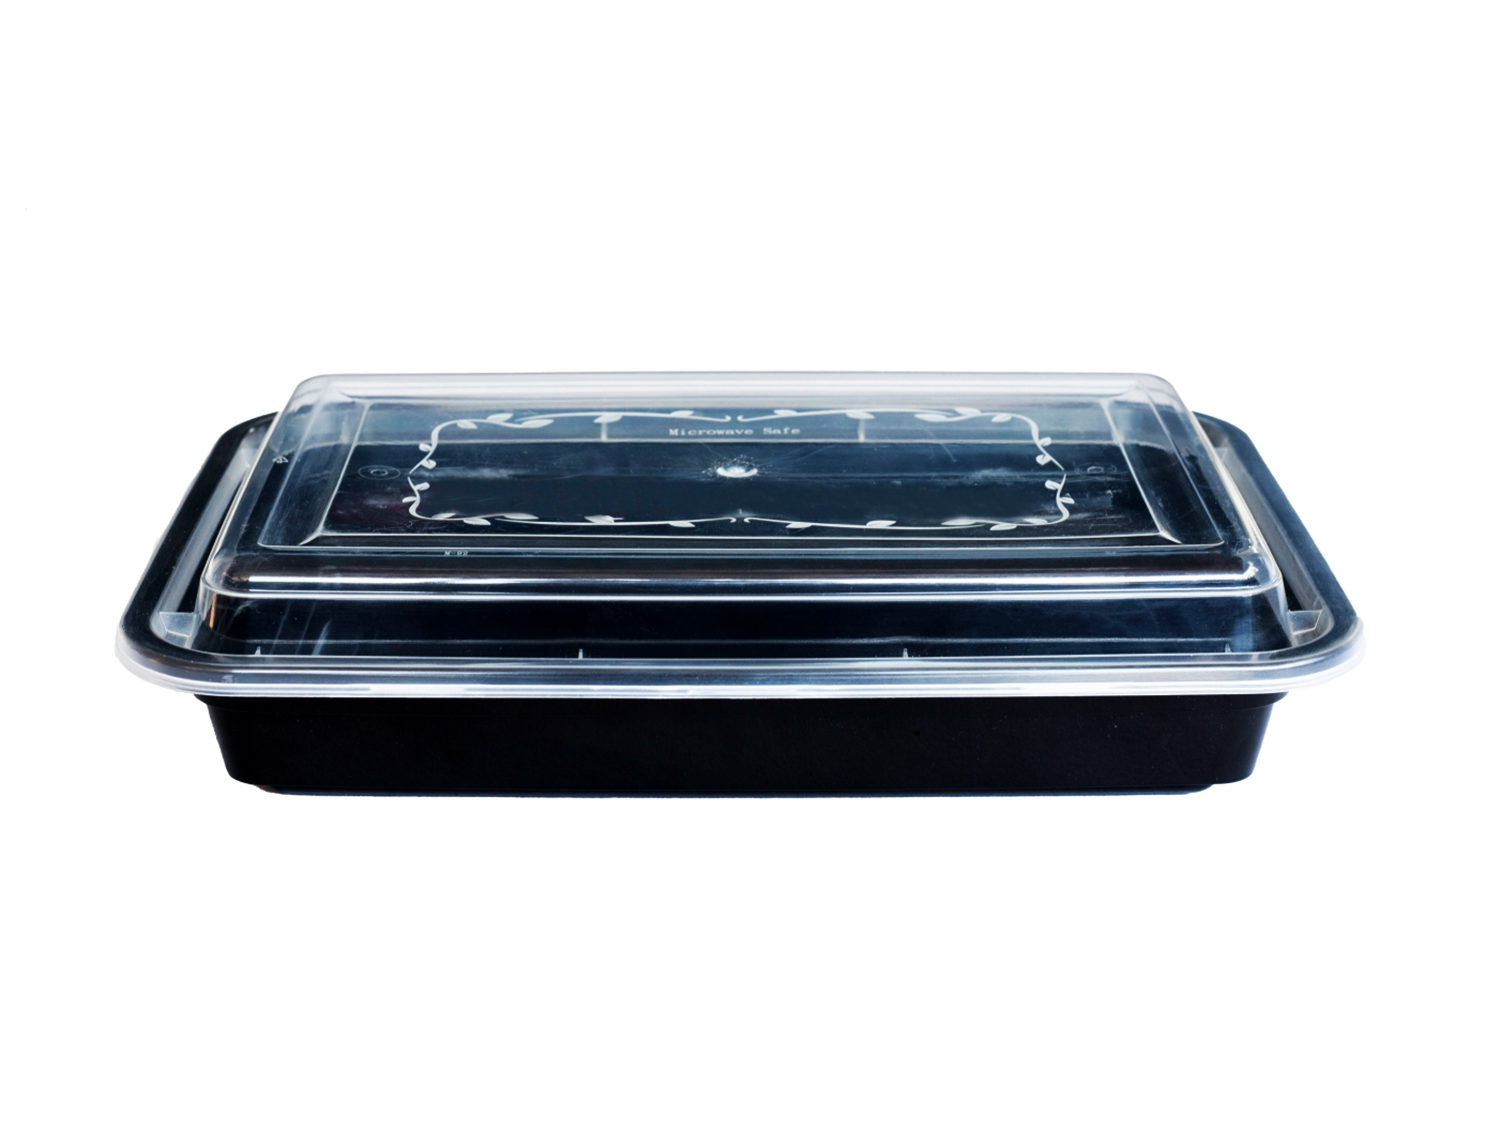 Damati RE 28 Rectangular Container by channel packaging